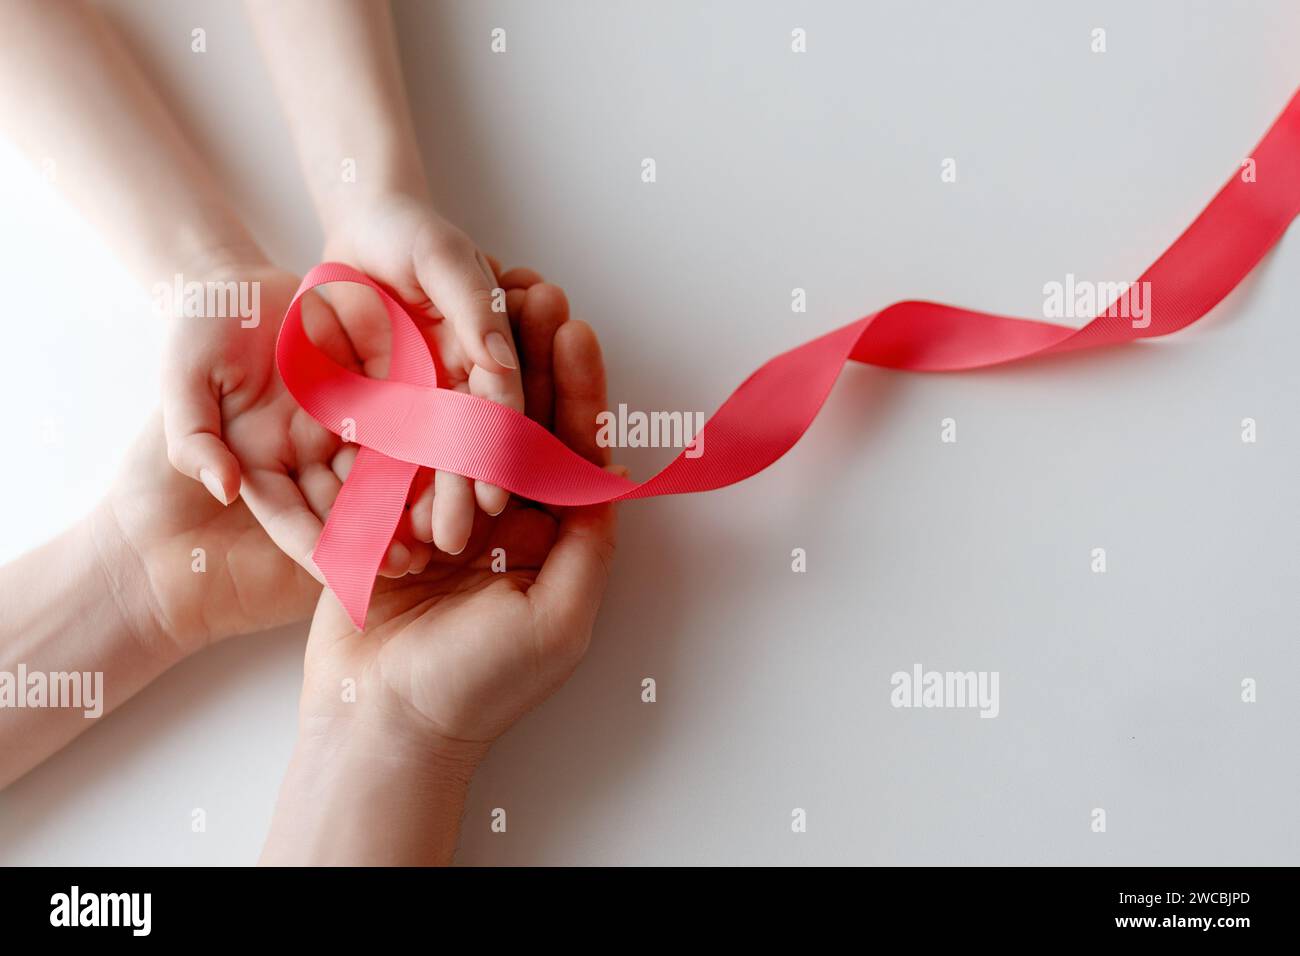 Hands of women with pink satin ribbon symbolizing concept of illness awareness, expressing solidarity and support for cancer patients and survivors. D Stock Photo